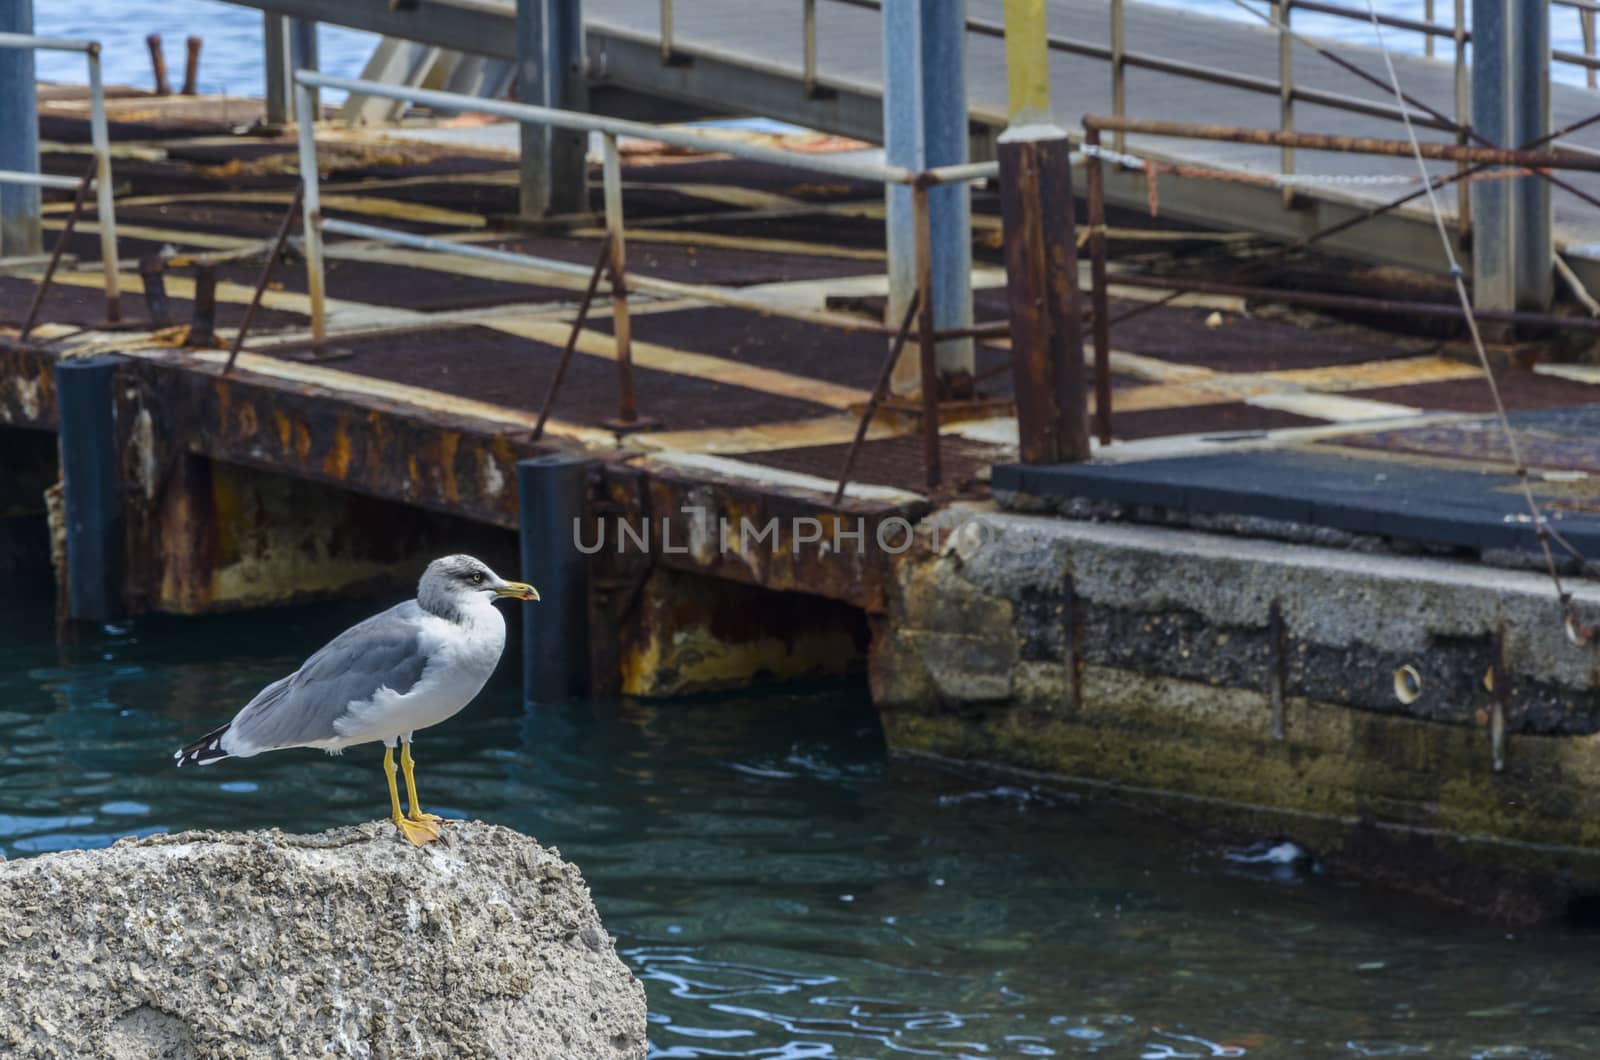 Eolian seagull with attentive look waiting for a fish in the port of Lipari island italy